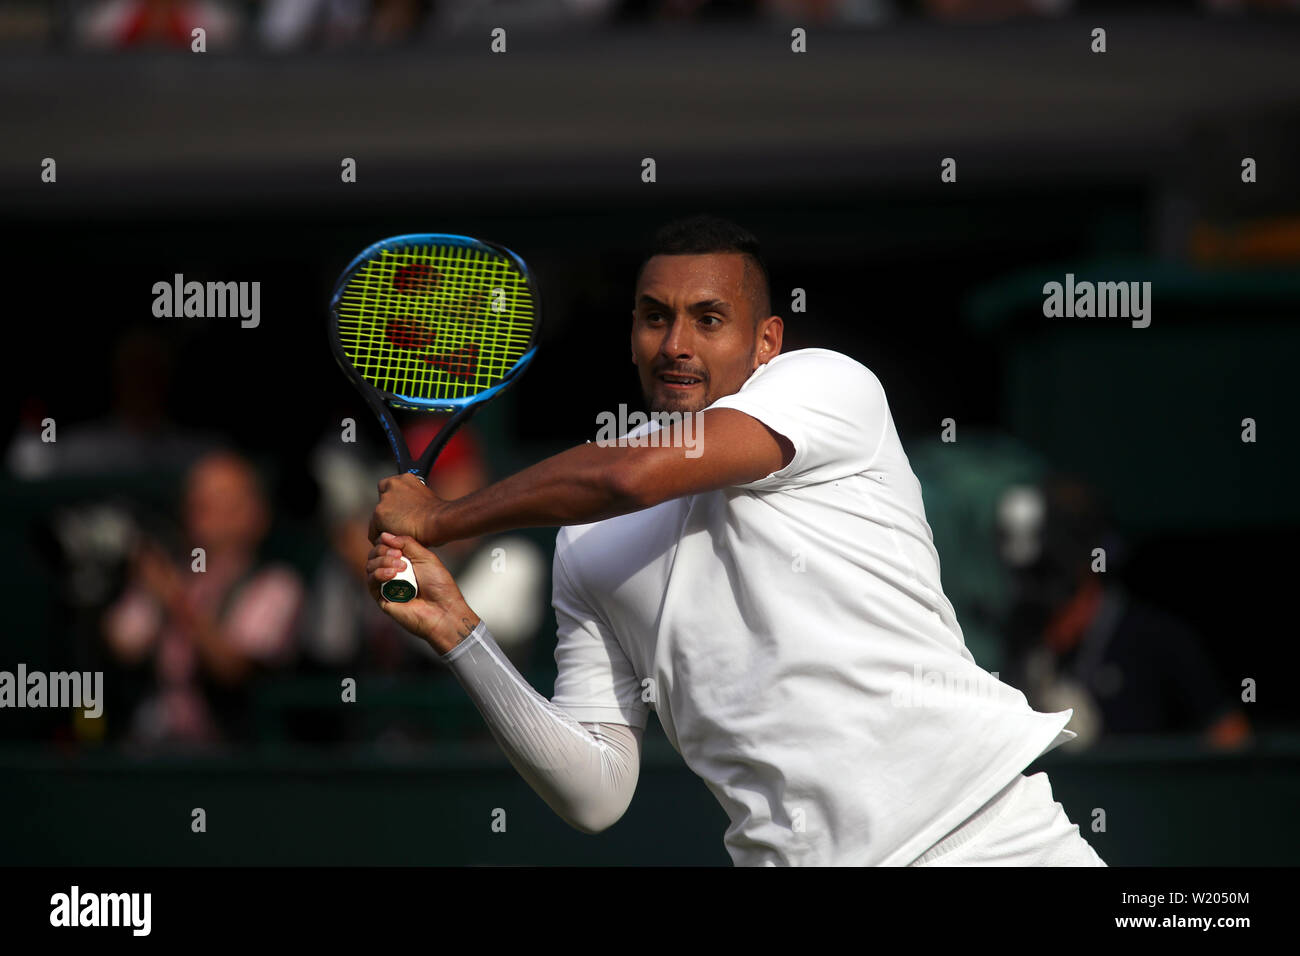 London, UK. 04th July, 2019. Wimbledon, 4 July 2019 - Nick Kyrgios in action against Rafael Nadal during their second round match today at Wimbledon. Credit: Adam Stoltman/Alamy Live News Stock Photo